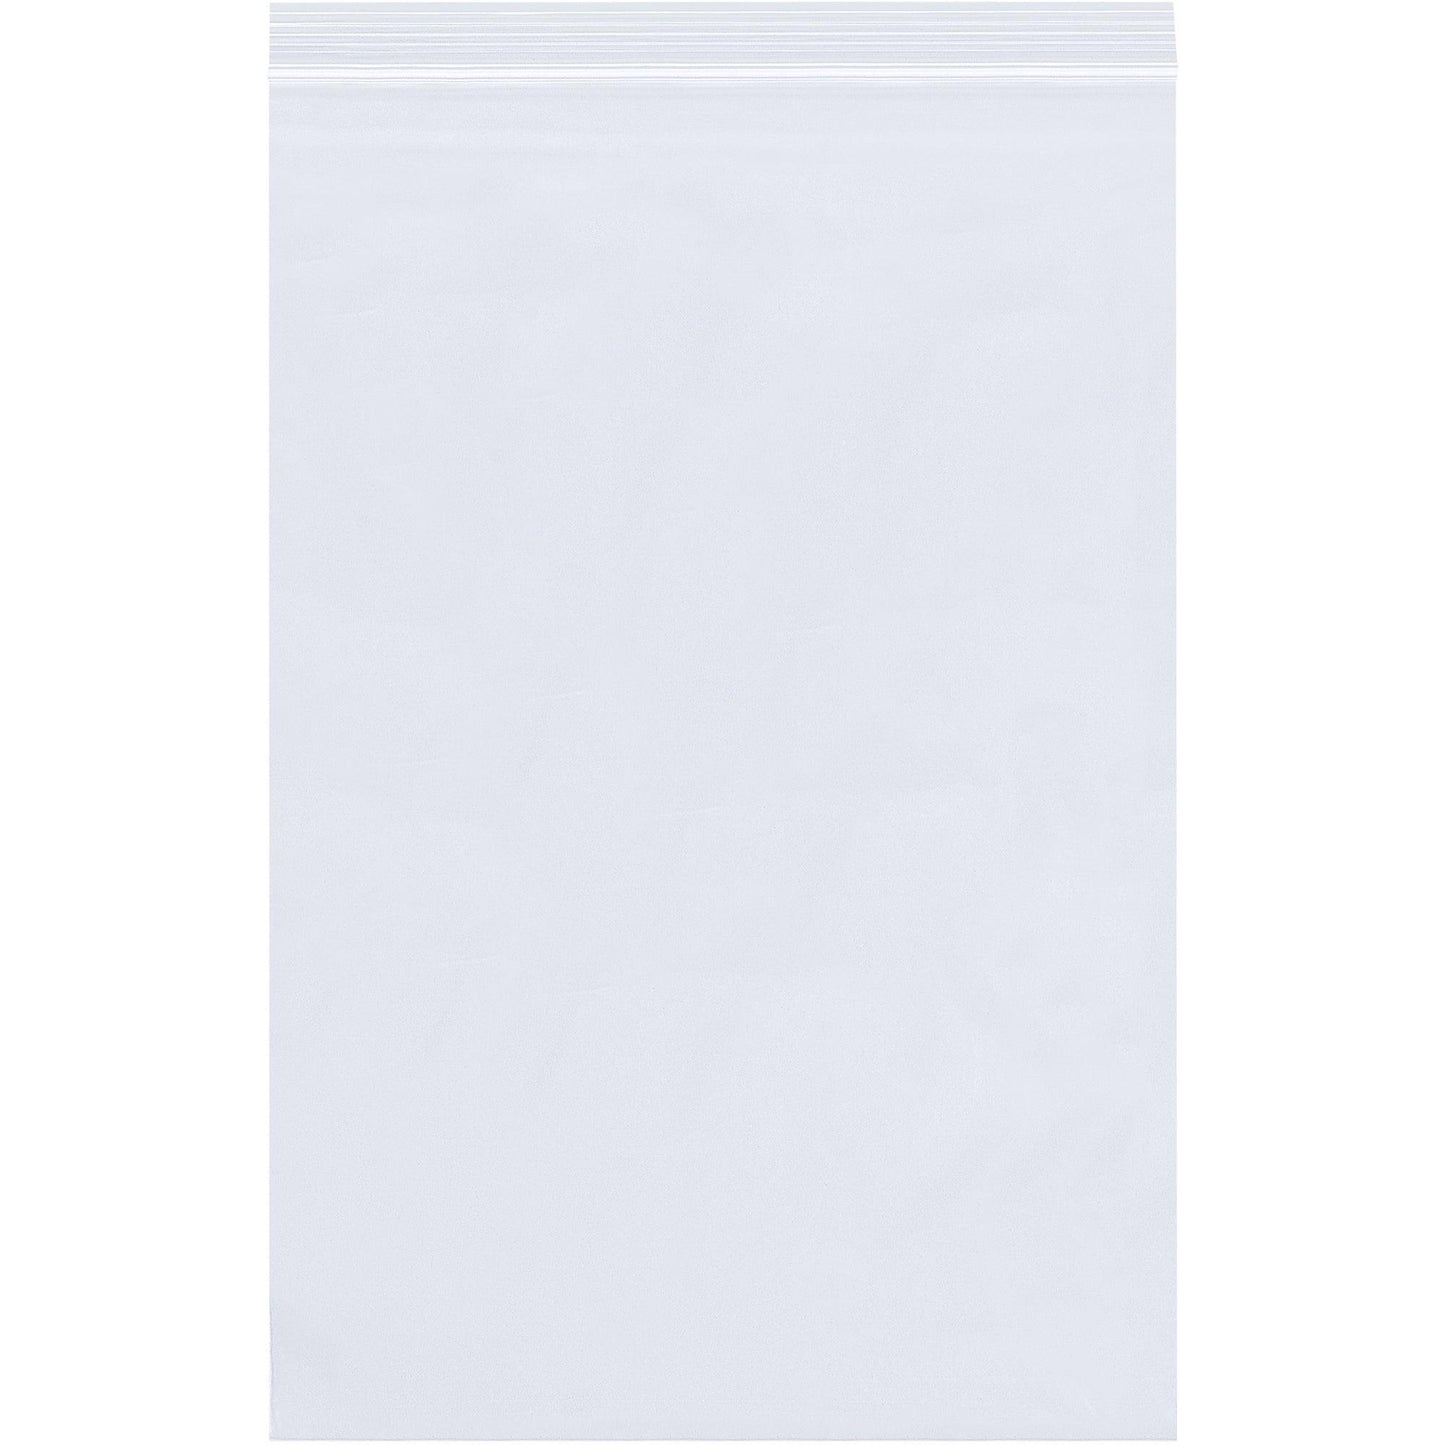 14 x 24" - 8 Mil Reclosable Poly Bags - PB3923